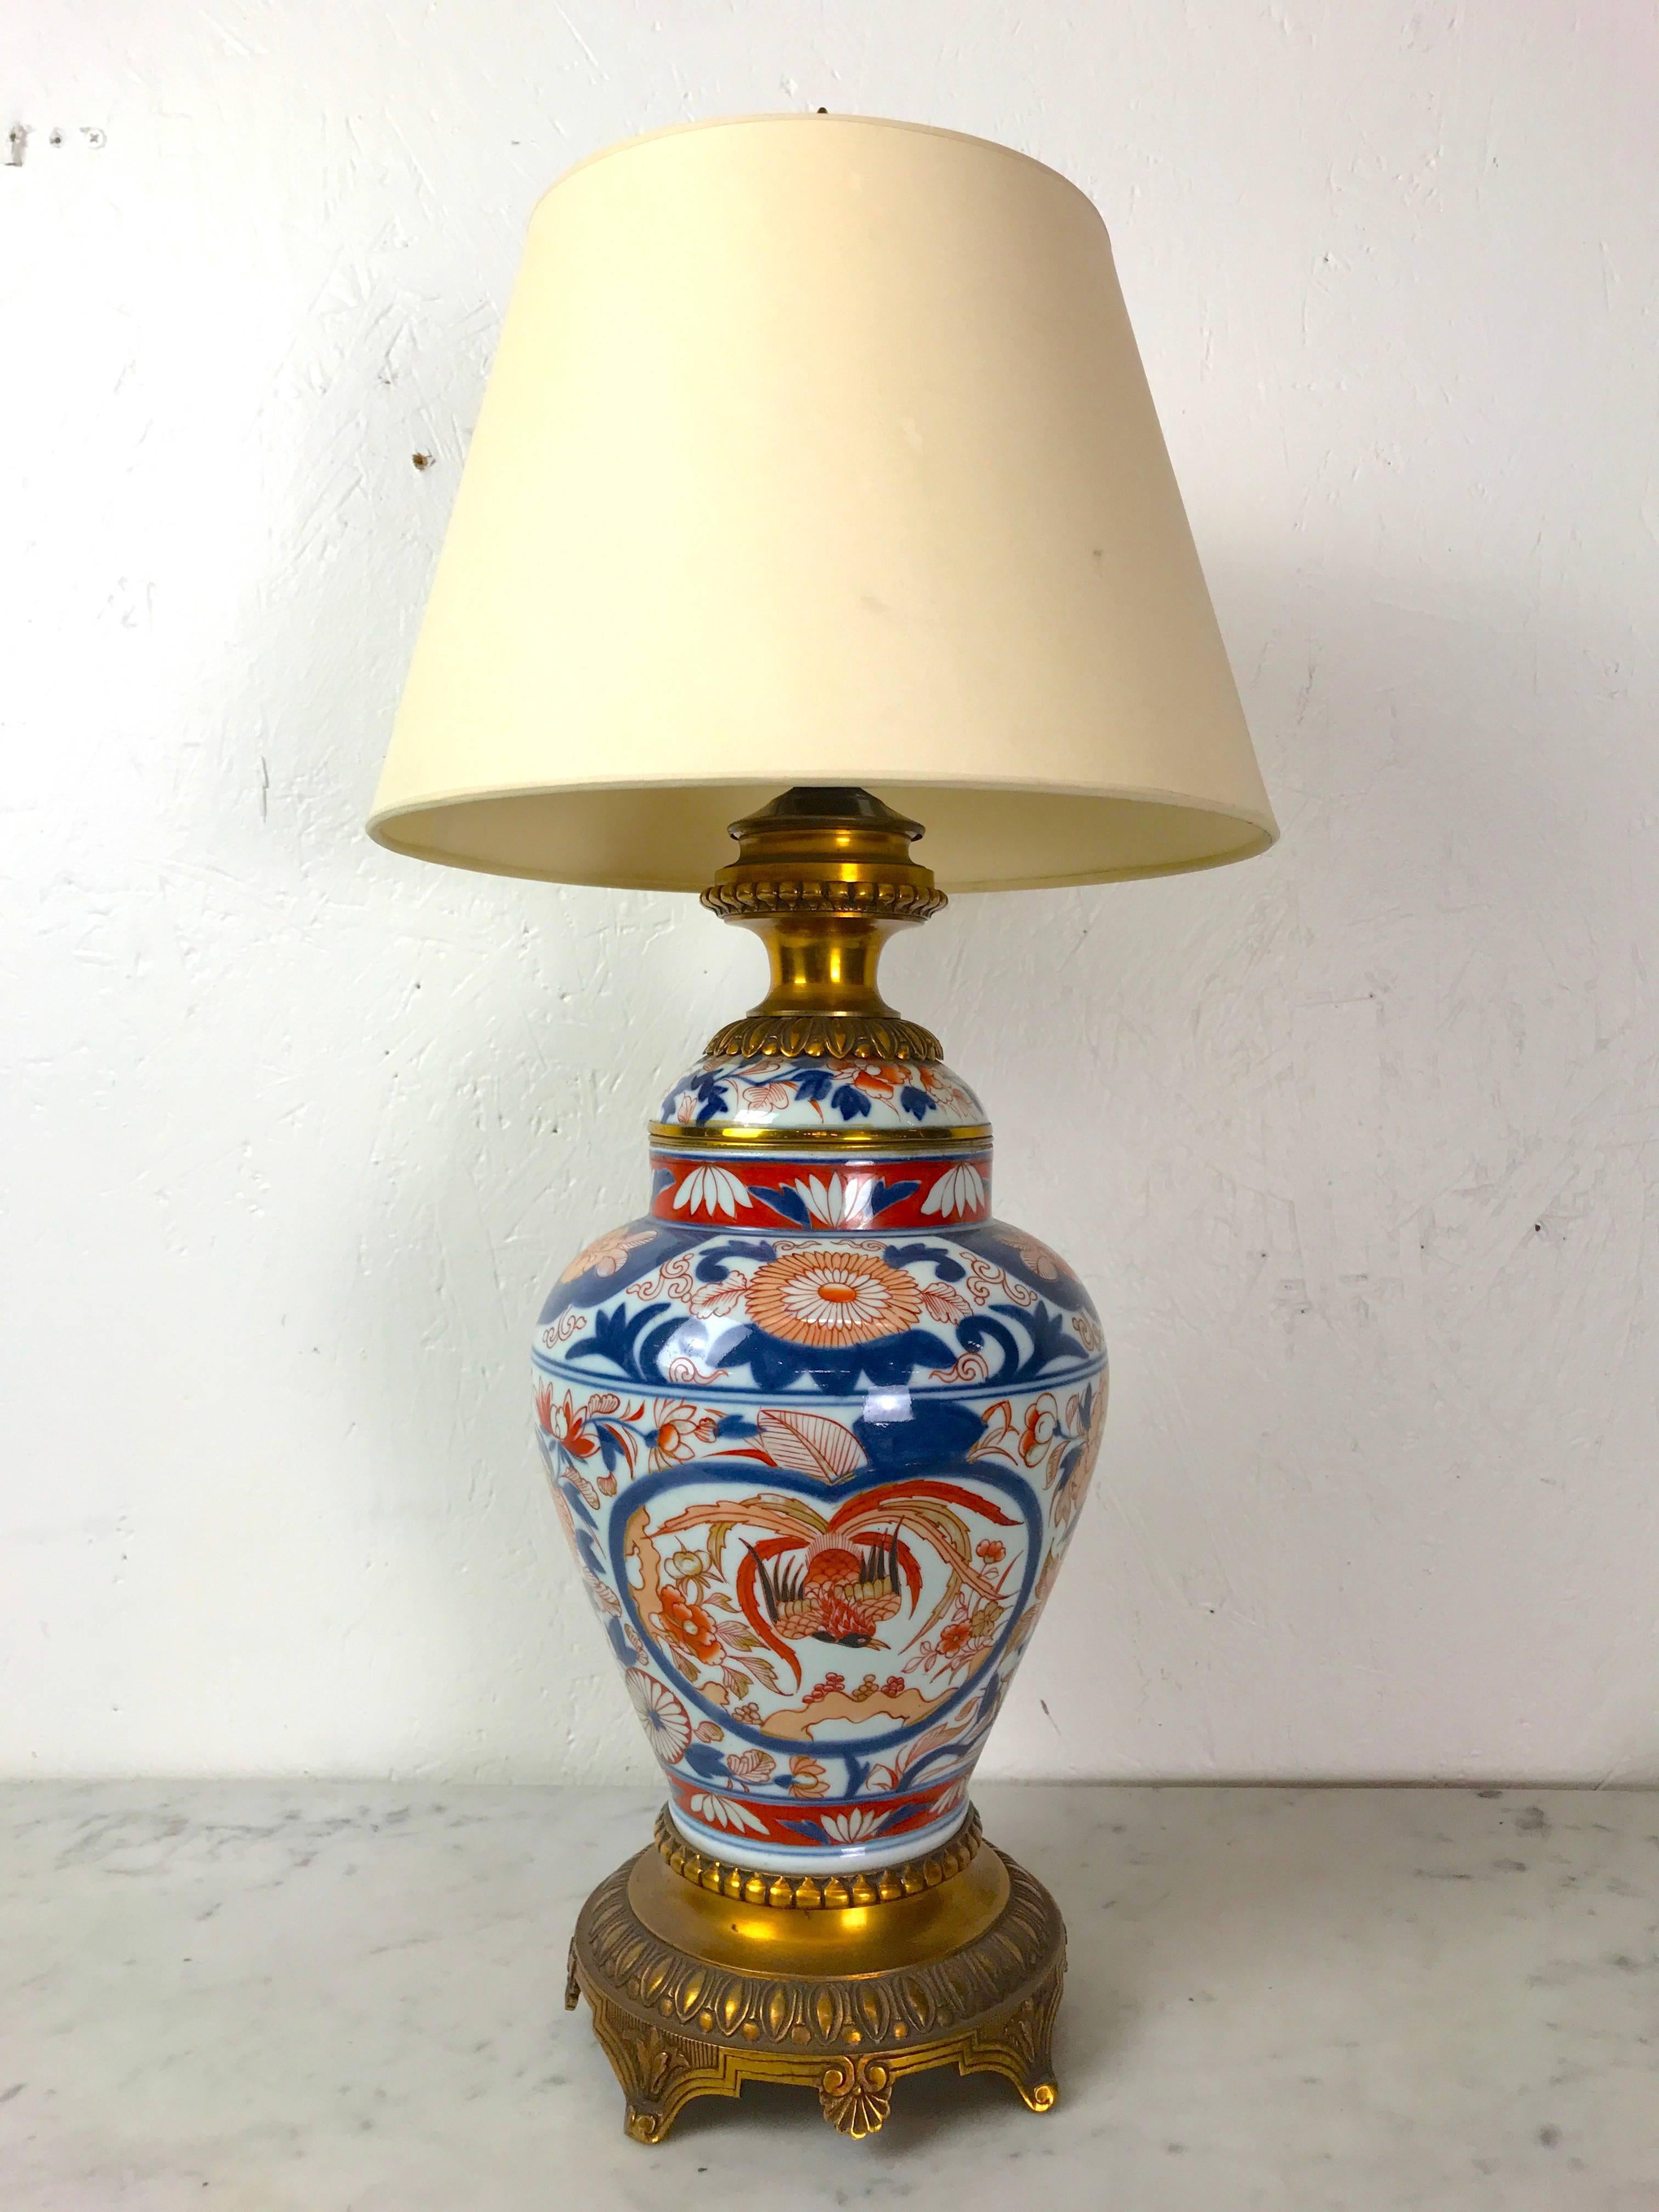 Ormolu-mounted Imari ginger jar, now as a lamp. Newly wired, the shade is for display purposes and is not included. 15.5